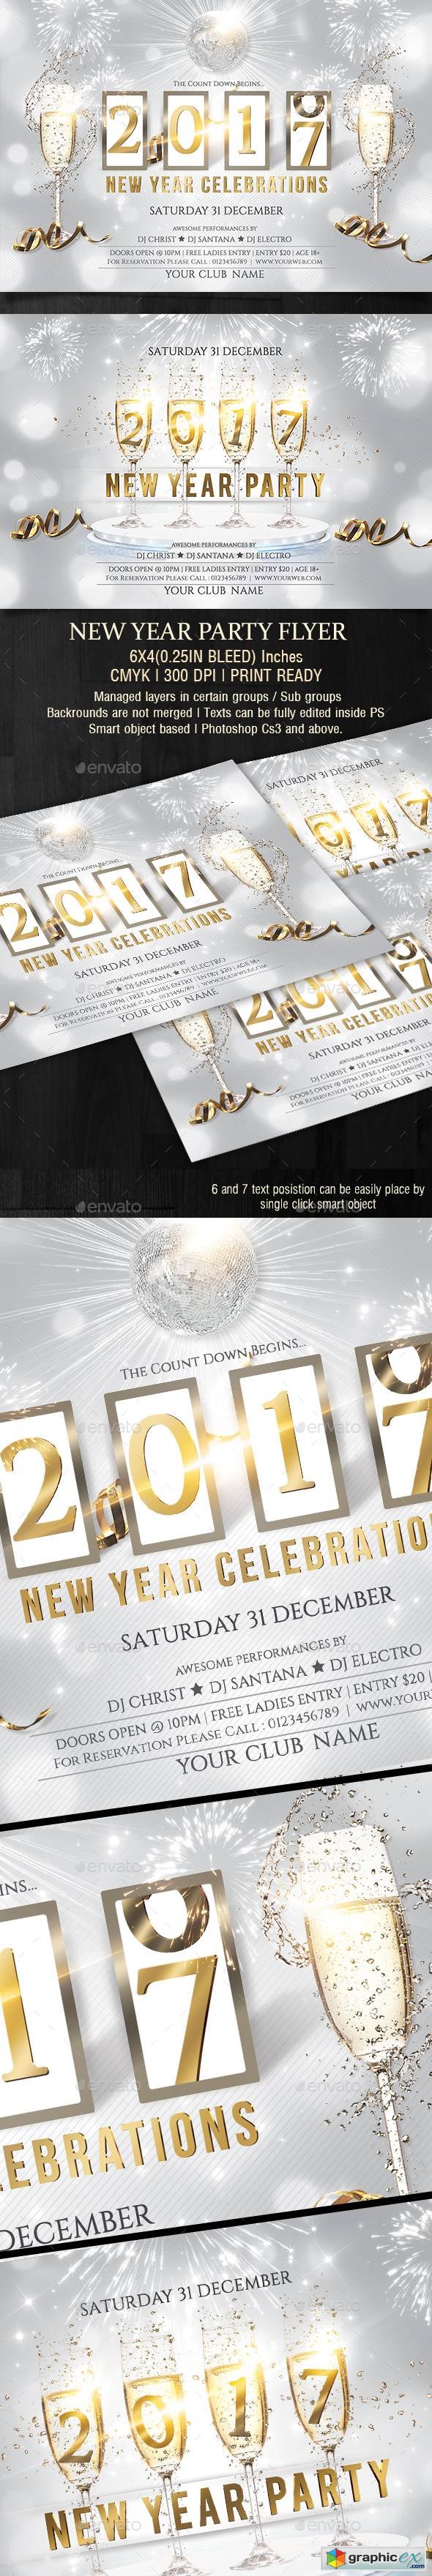 New Year Party Flyer 19047483